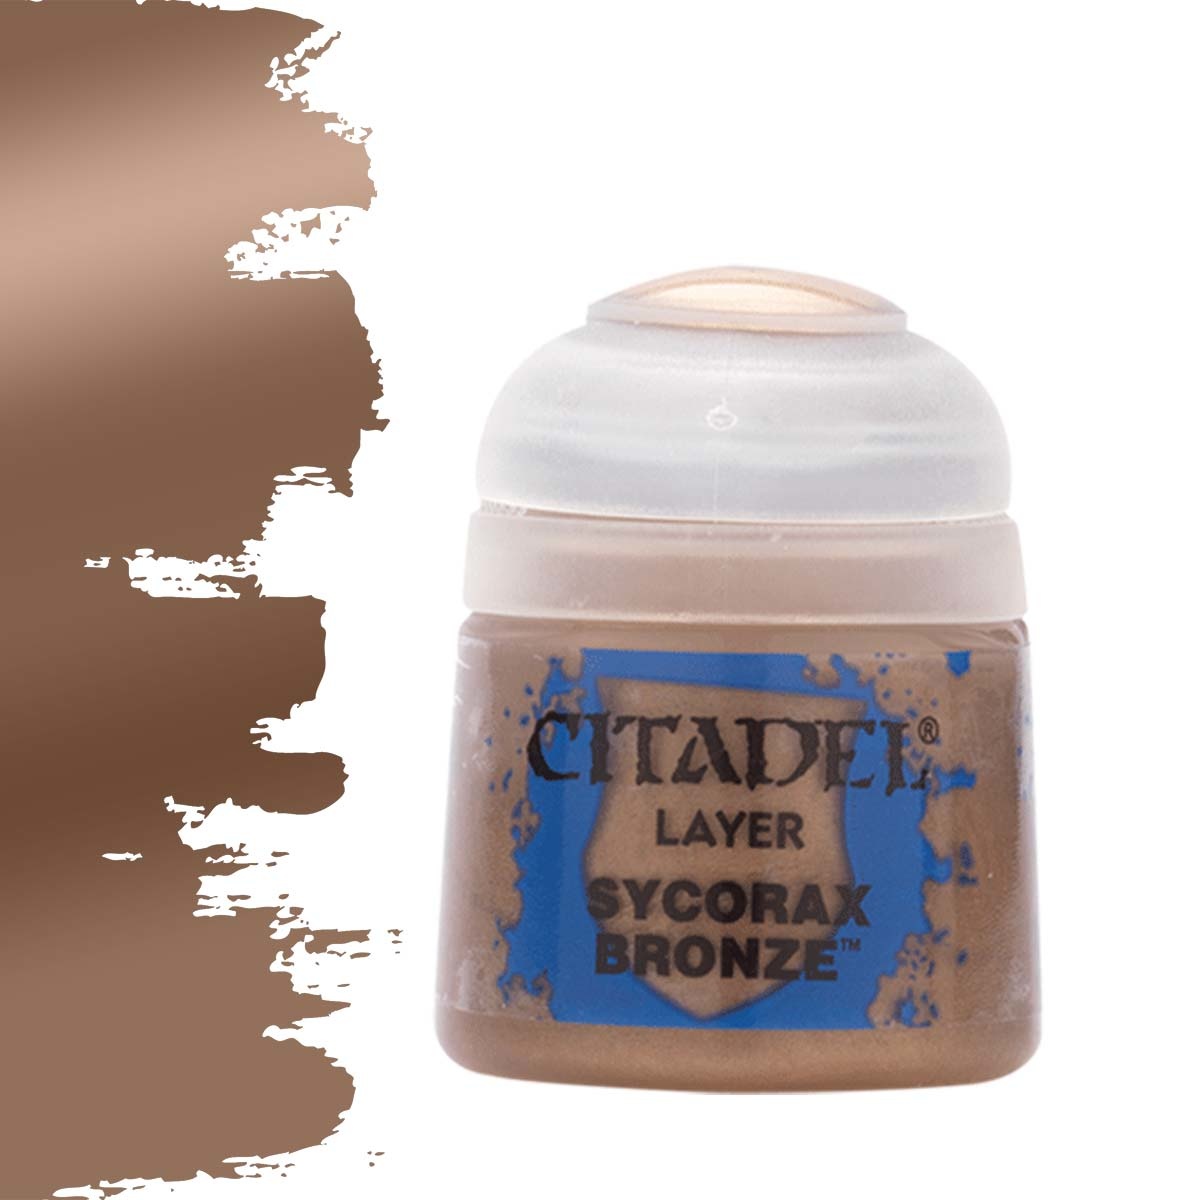 Citadel Sycorax Bronze - Layer Paint - 12ml - 22-64 - Buy now at ...